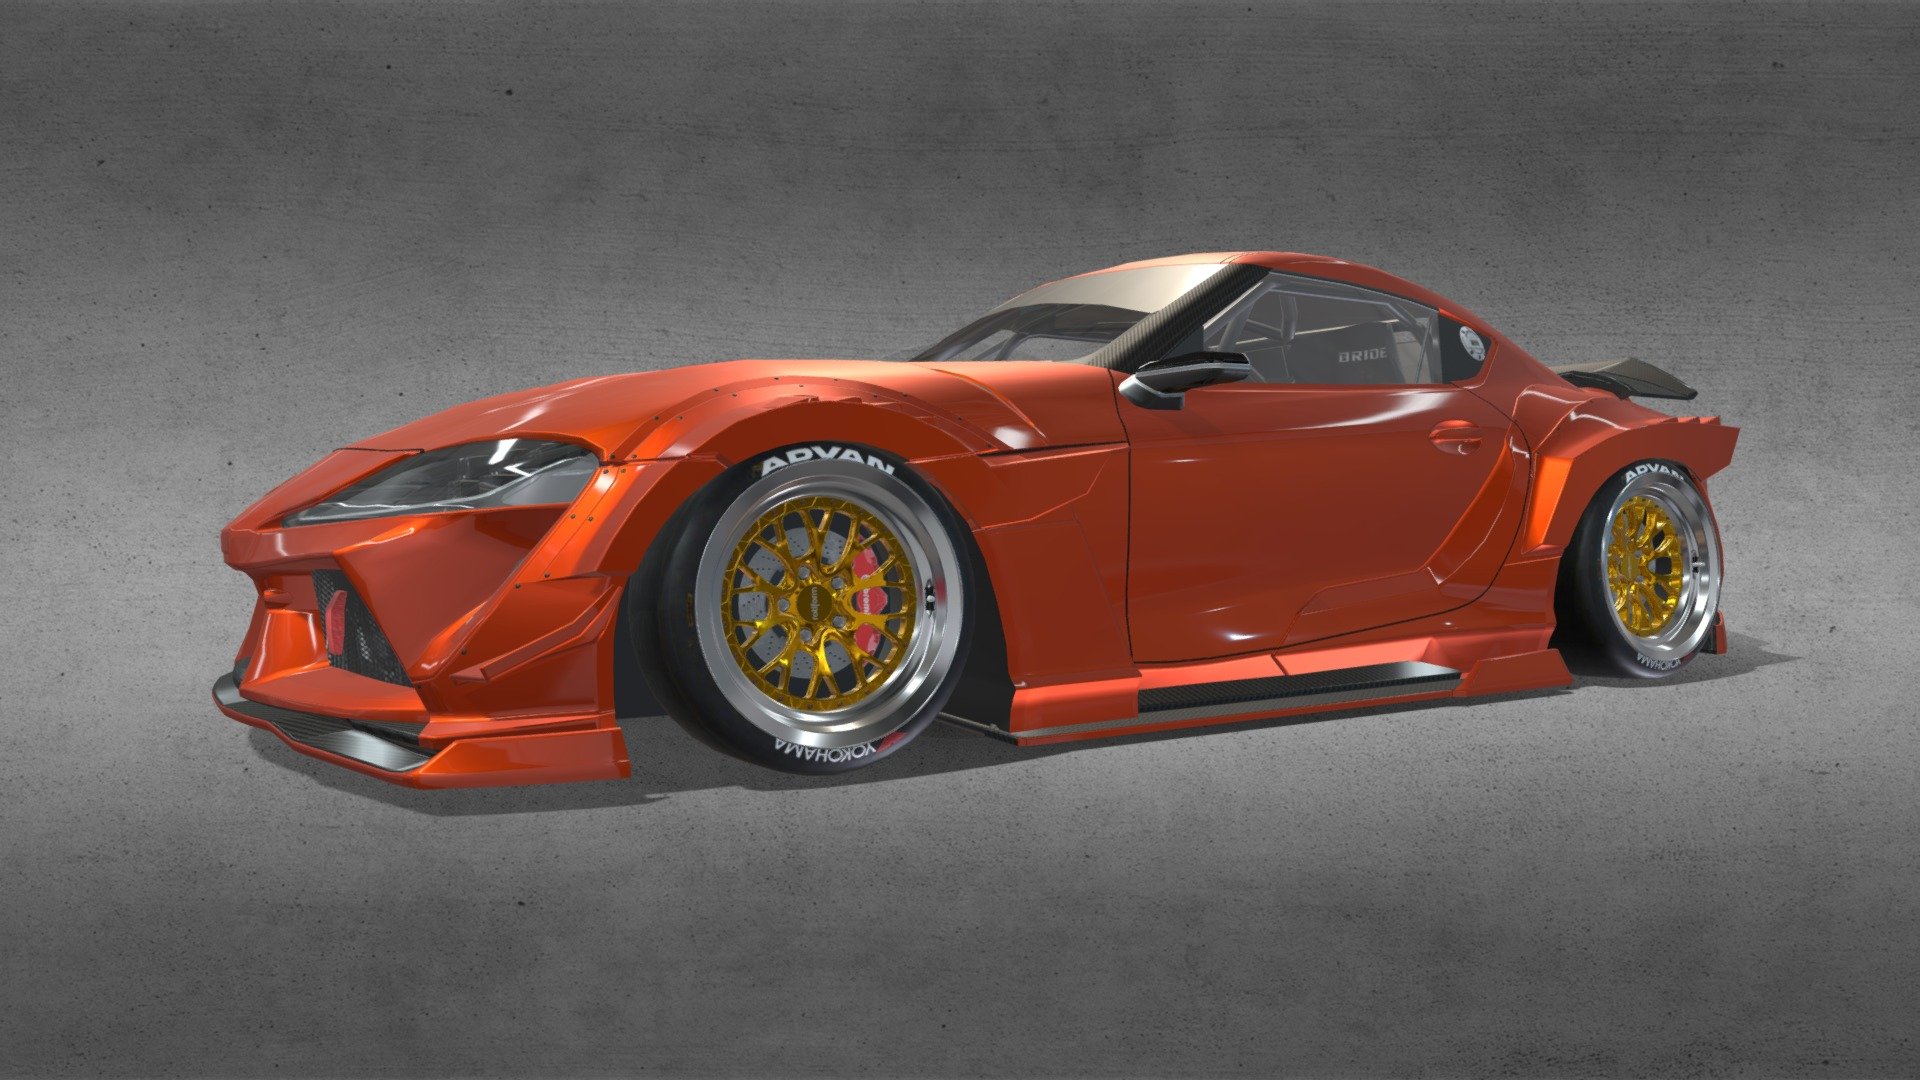 Without the wheels it is a Low poly model 25k tris..Car model is the 2021 Toyota Supra GR with a Wide body kit drift style&hellip; - 2021 Toyota Supra GR Wide body kit - 3D model by All-Wide (@dsm350) 3d model